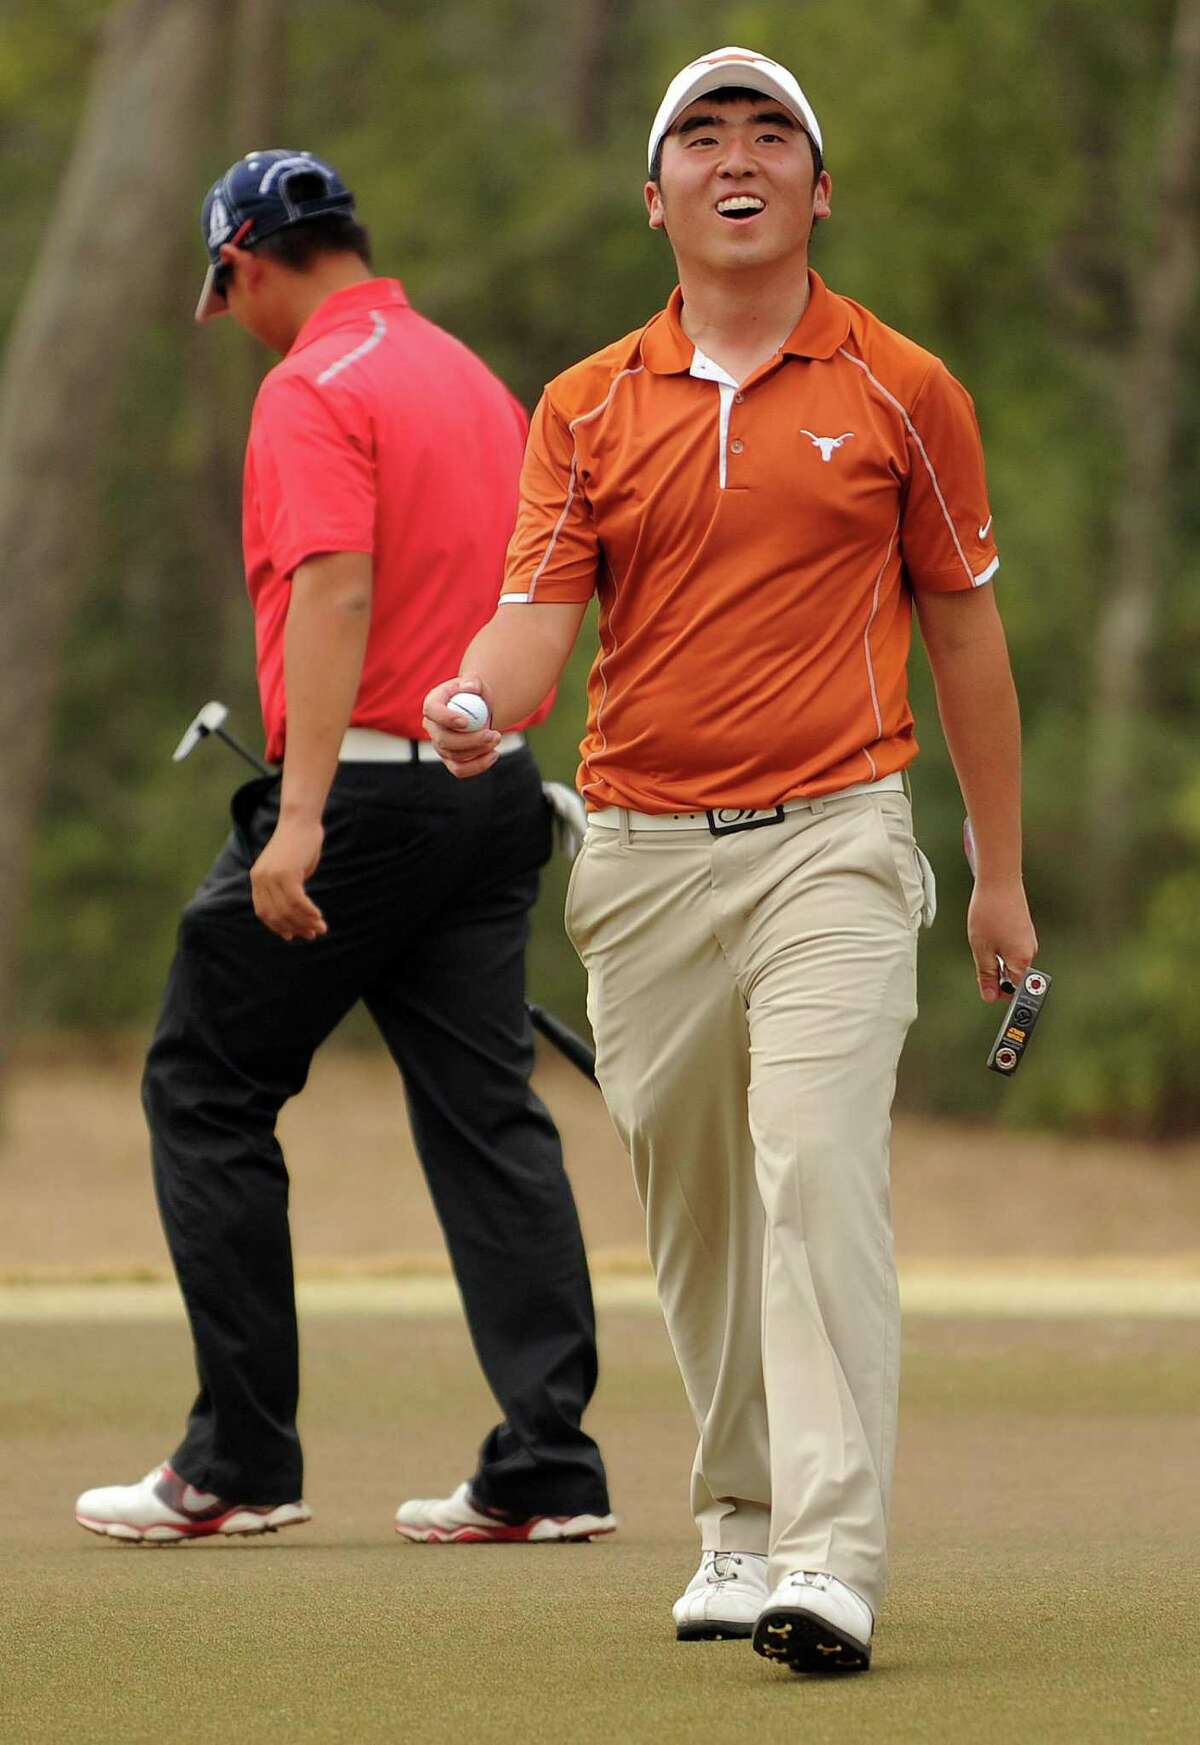 Doug Ghim, right, walks off the No. 17 green after getting up and down for par during the final round of the CB&I Boys Championship, Monday, February 17, 2014, at The Club at Carlton Woods' Fazio Championship Course in The Woodlands. Ghim won the tournament by five strokes over Carl Yuan and Andy Zhang.